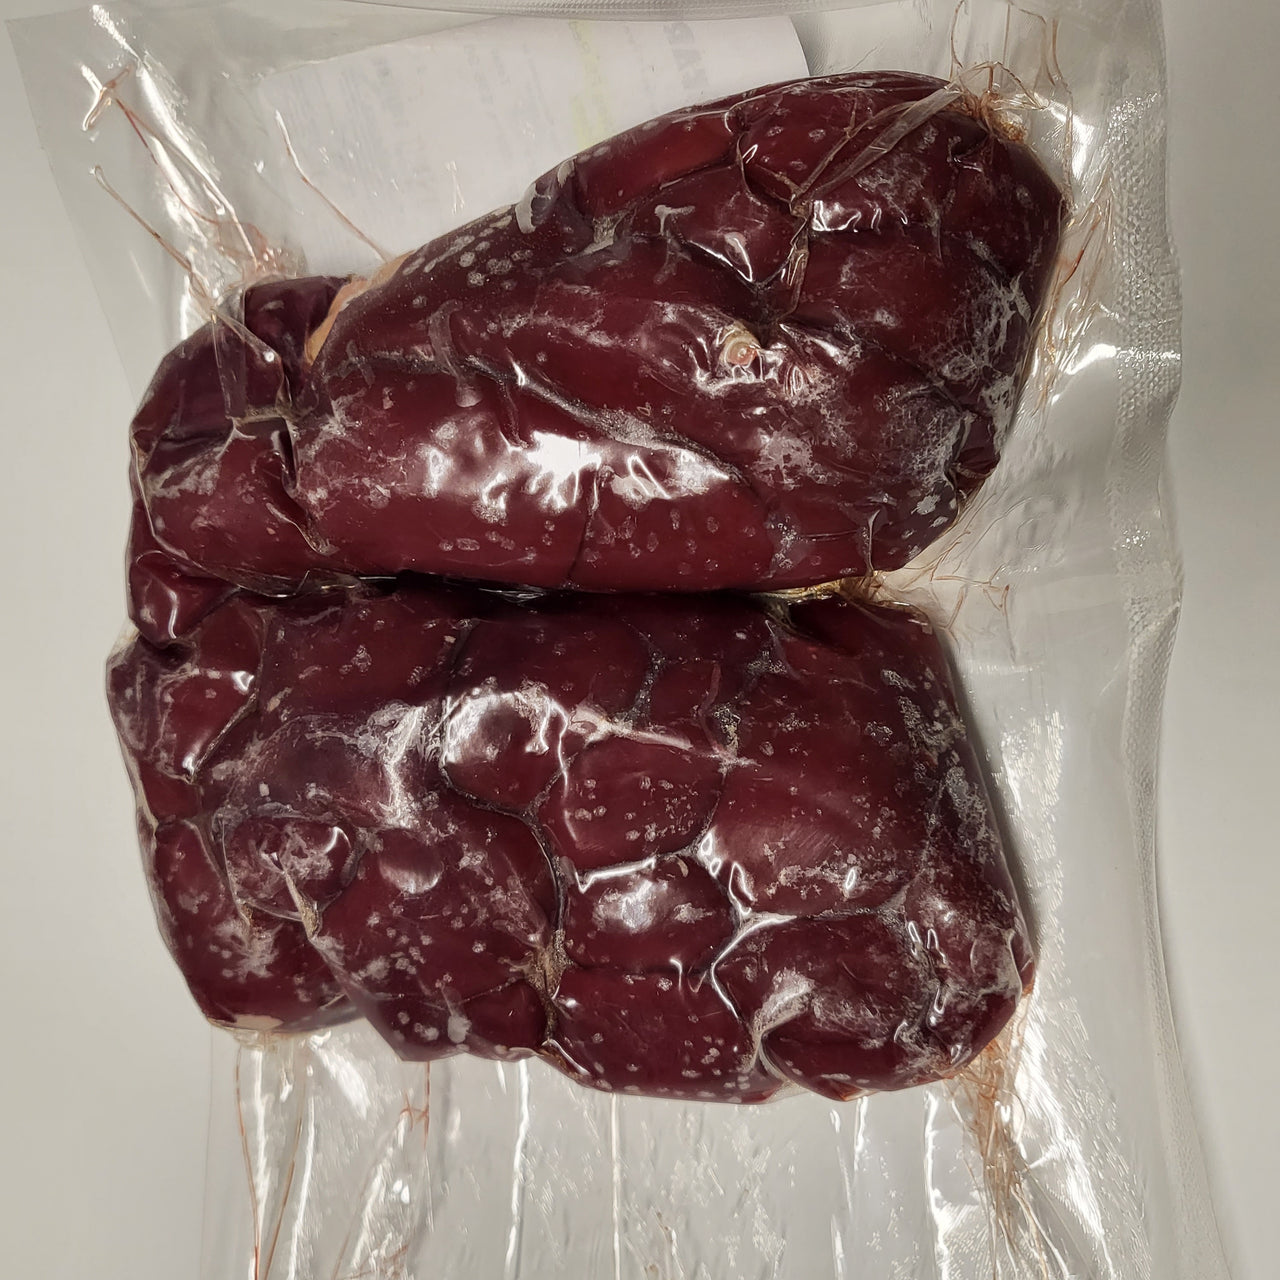 Grass Fed Grass Finished Beef Kidney Japanese Black Wagyu NOT AGED